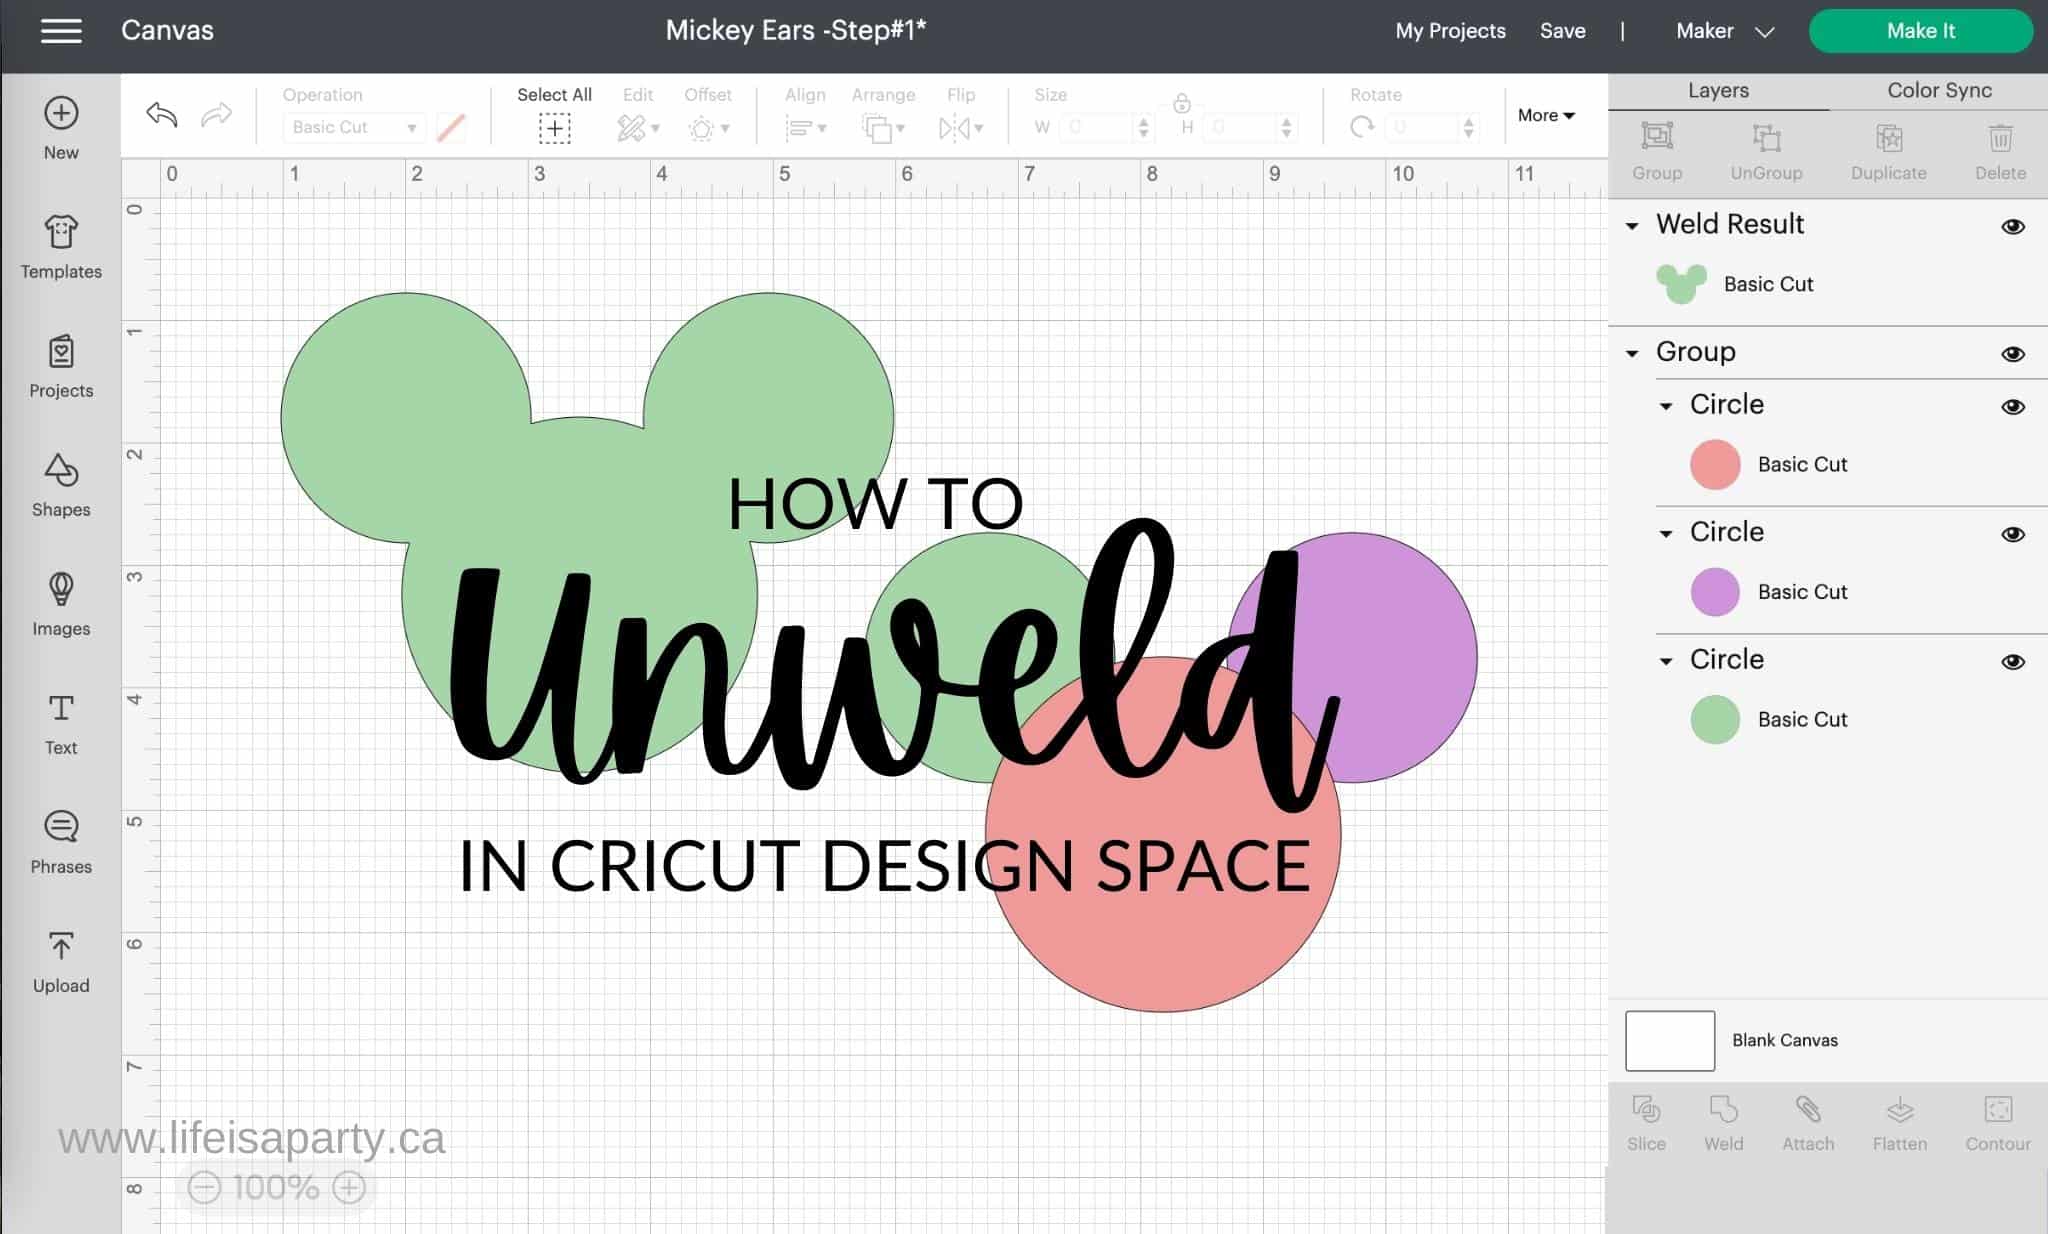 How Do You Unweld In Cricut Design Space: when to weld, how use it and how to unweld in Cricut Design Space.